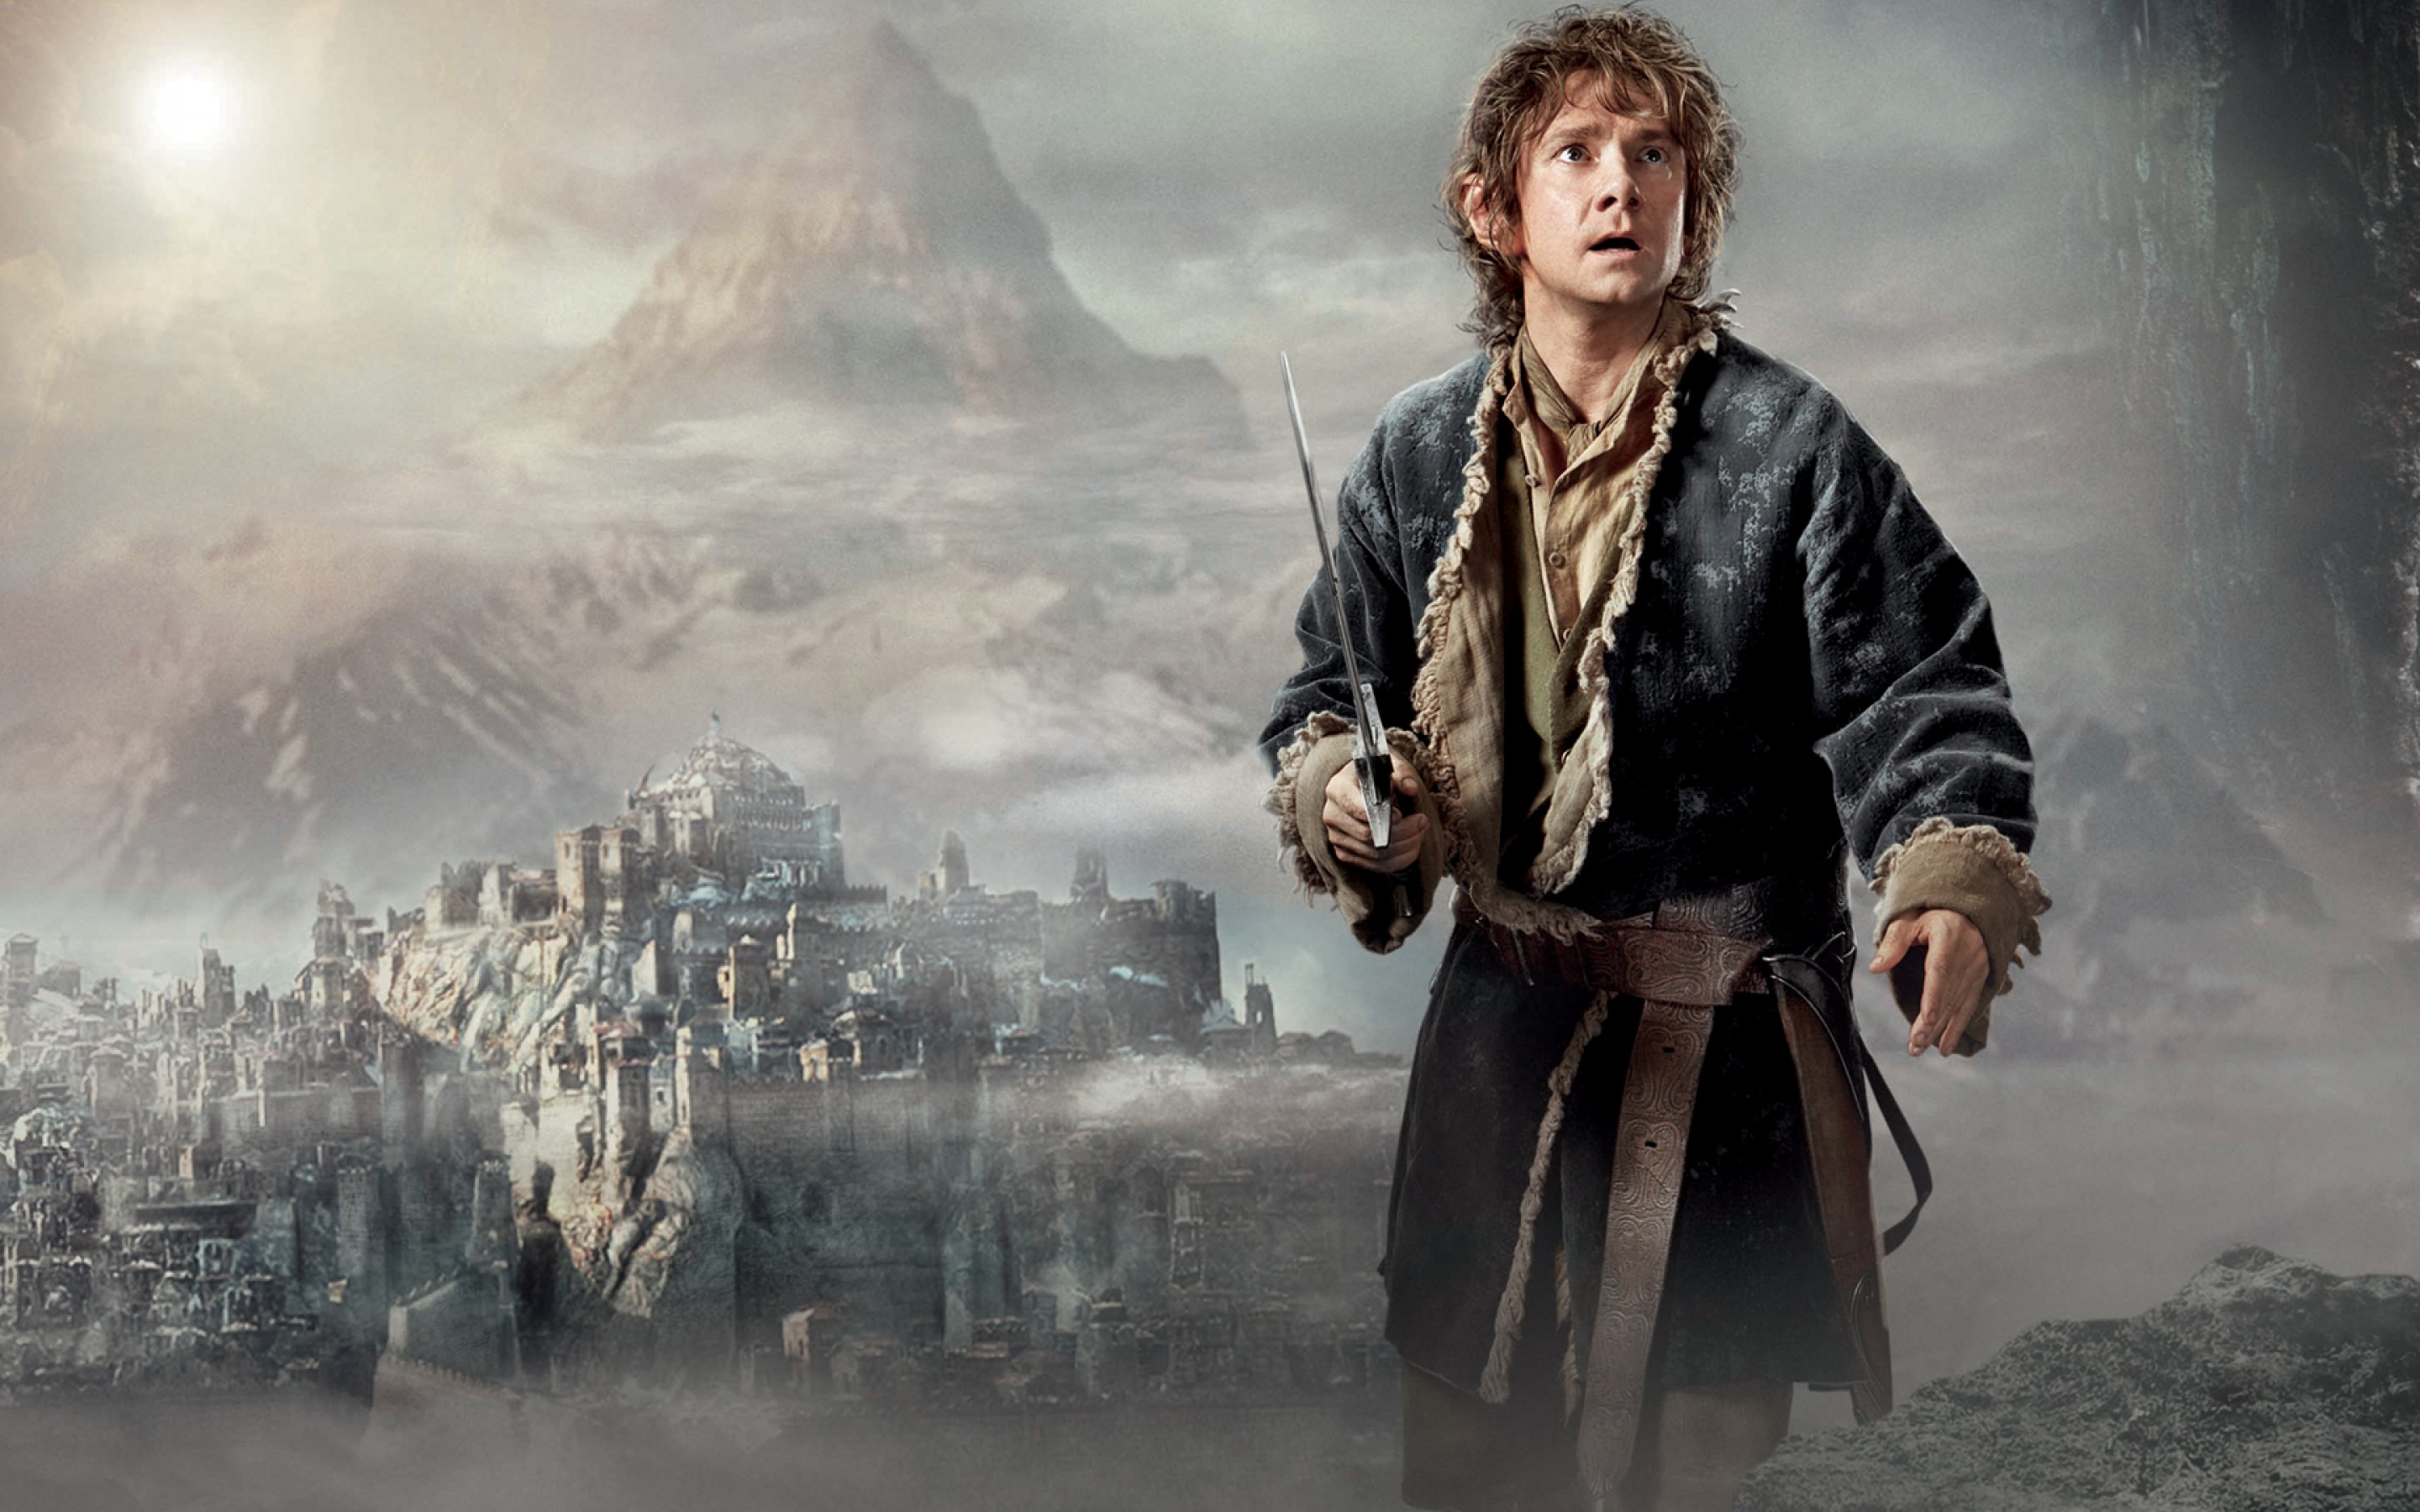 for iphone download The Hobbit: The Desolation of Smaug